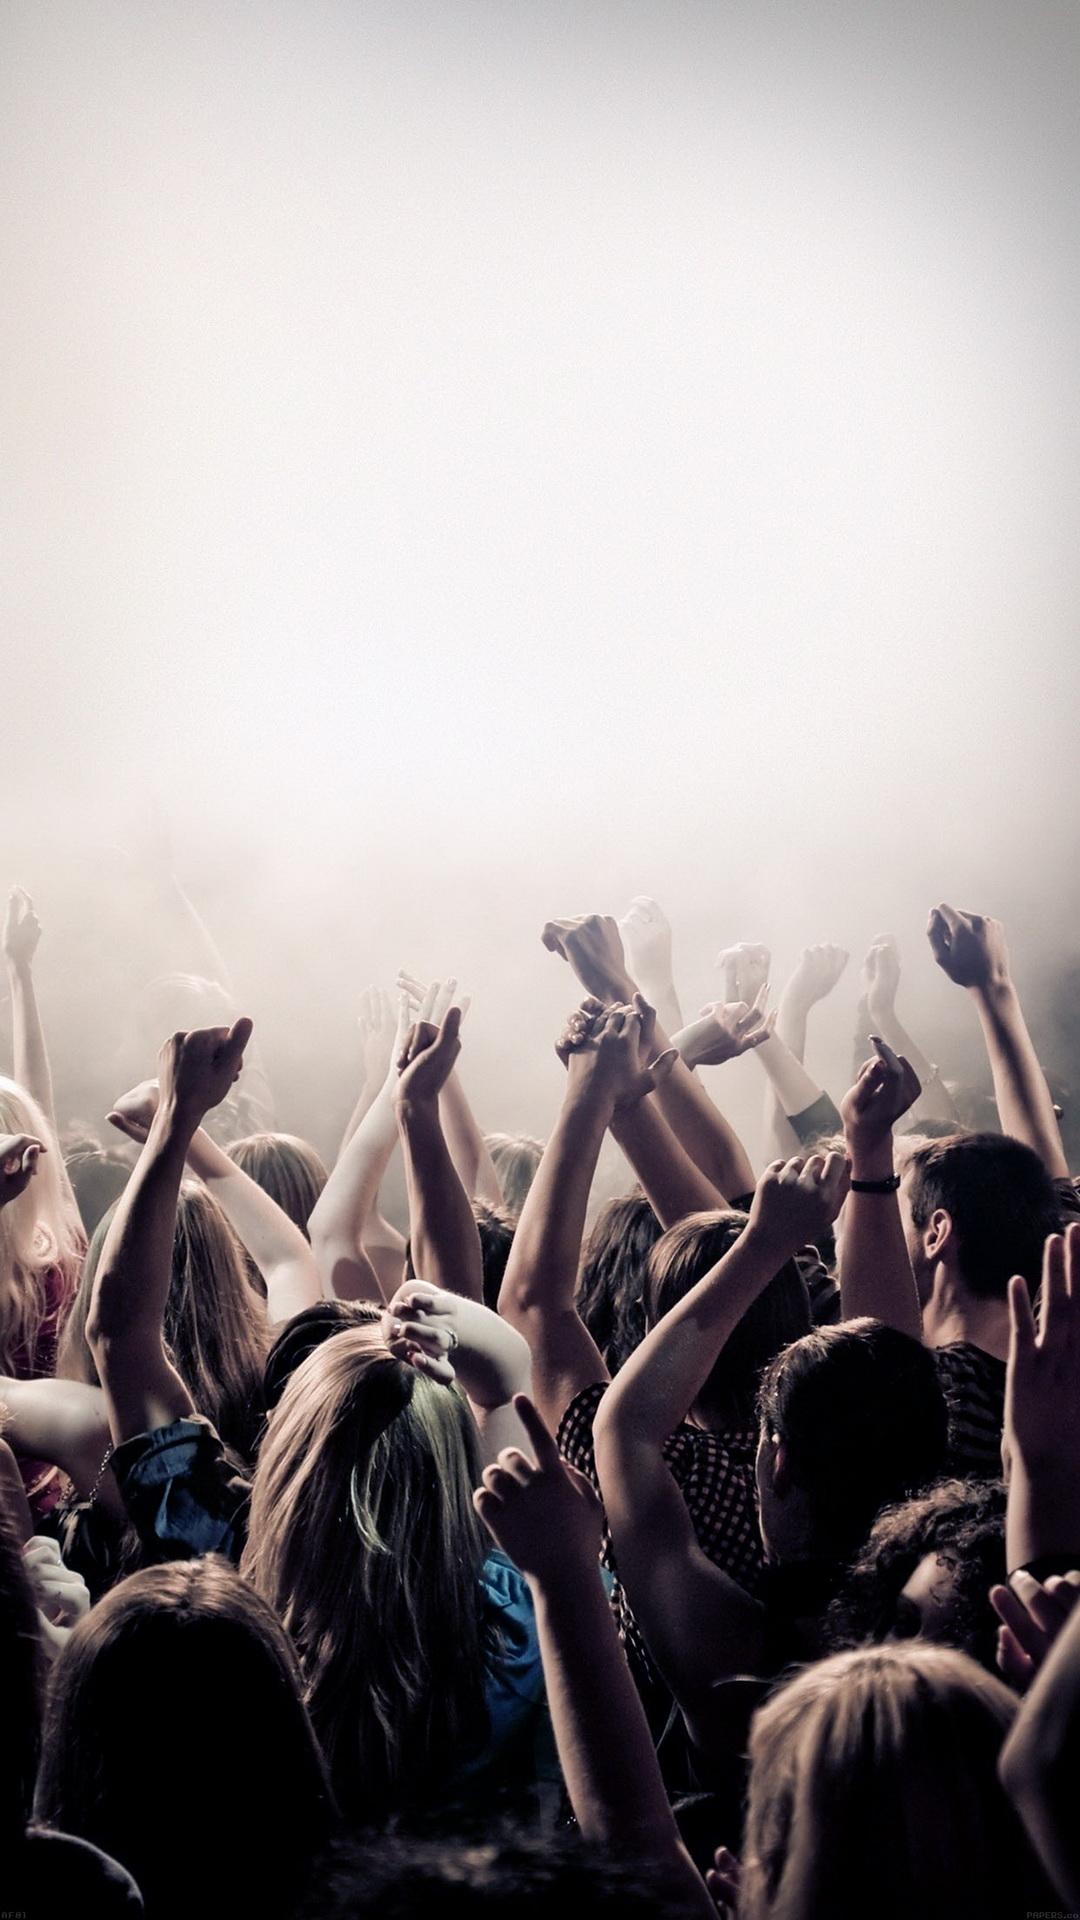 Concert Festival People Dancing Android Wallpaper free download